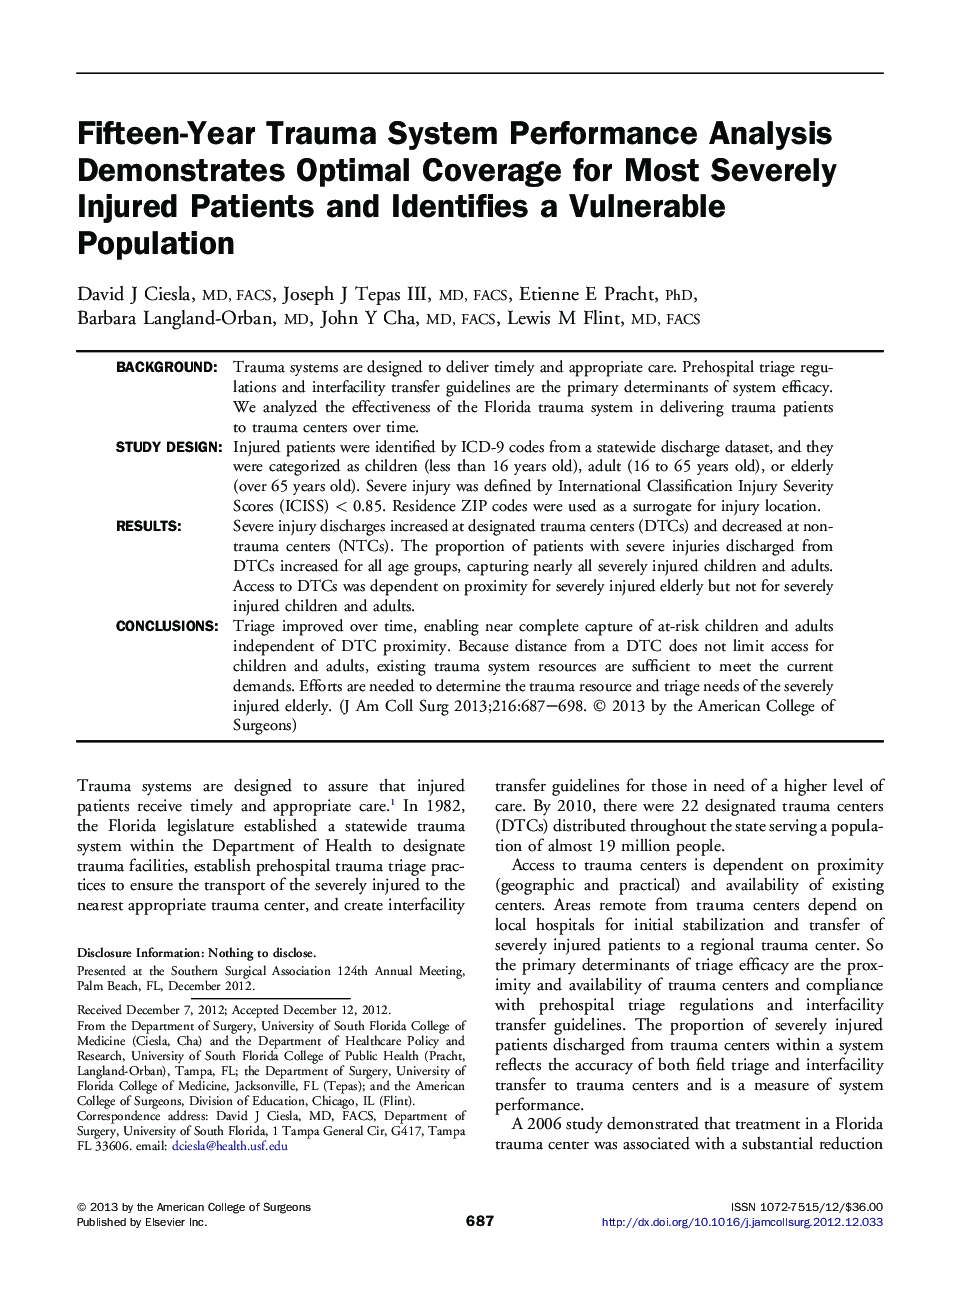 Fifteen-Year Trauma System Performance Analysis Demonstrates Optimal Coverage for Most Severely Injured Patients and Identifies a Vulnerable Population 